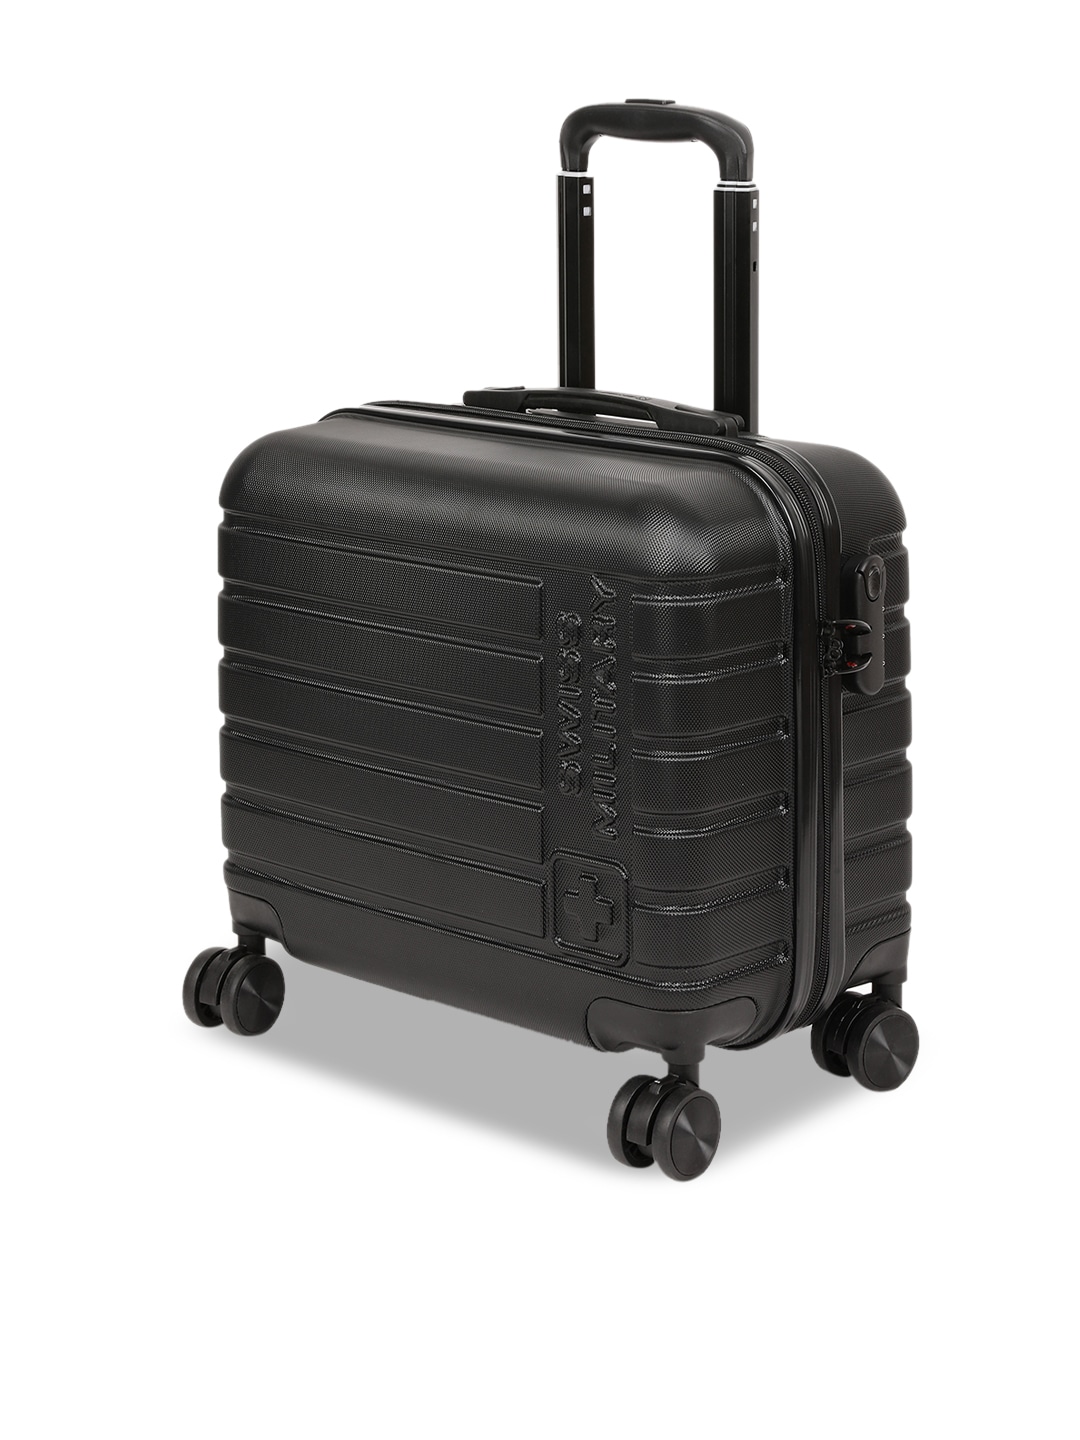 HTL95  20inch Hard Trolley Luggage  SWISS MILITARY CONSUMER GOODS LIMITED